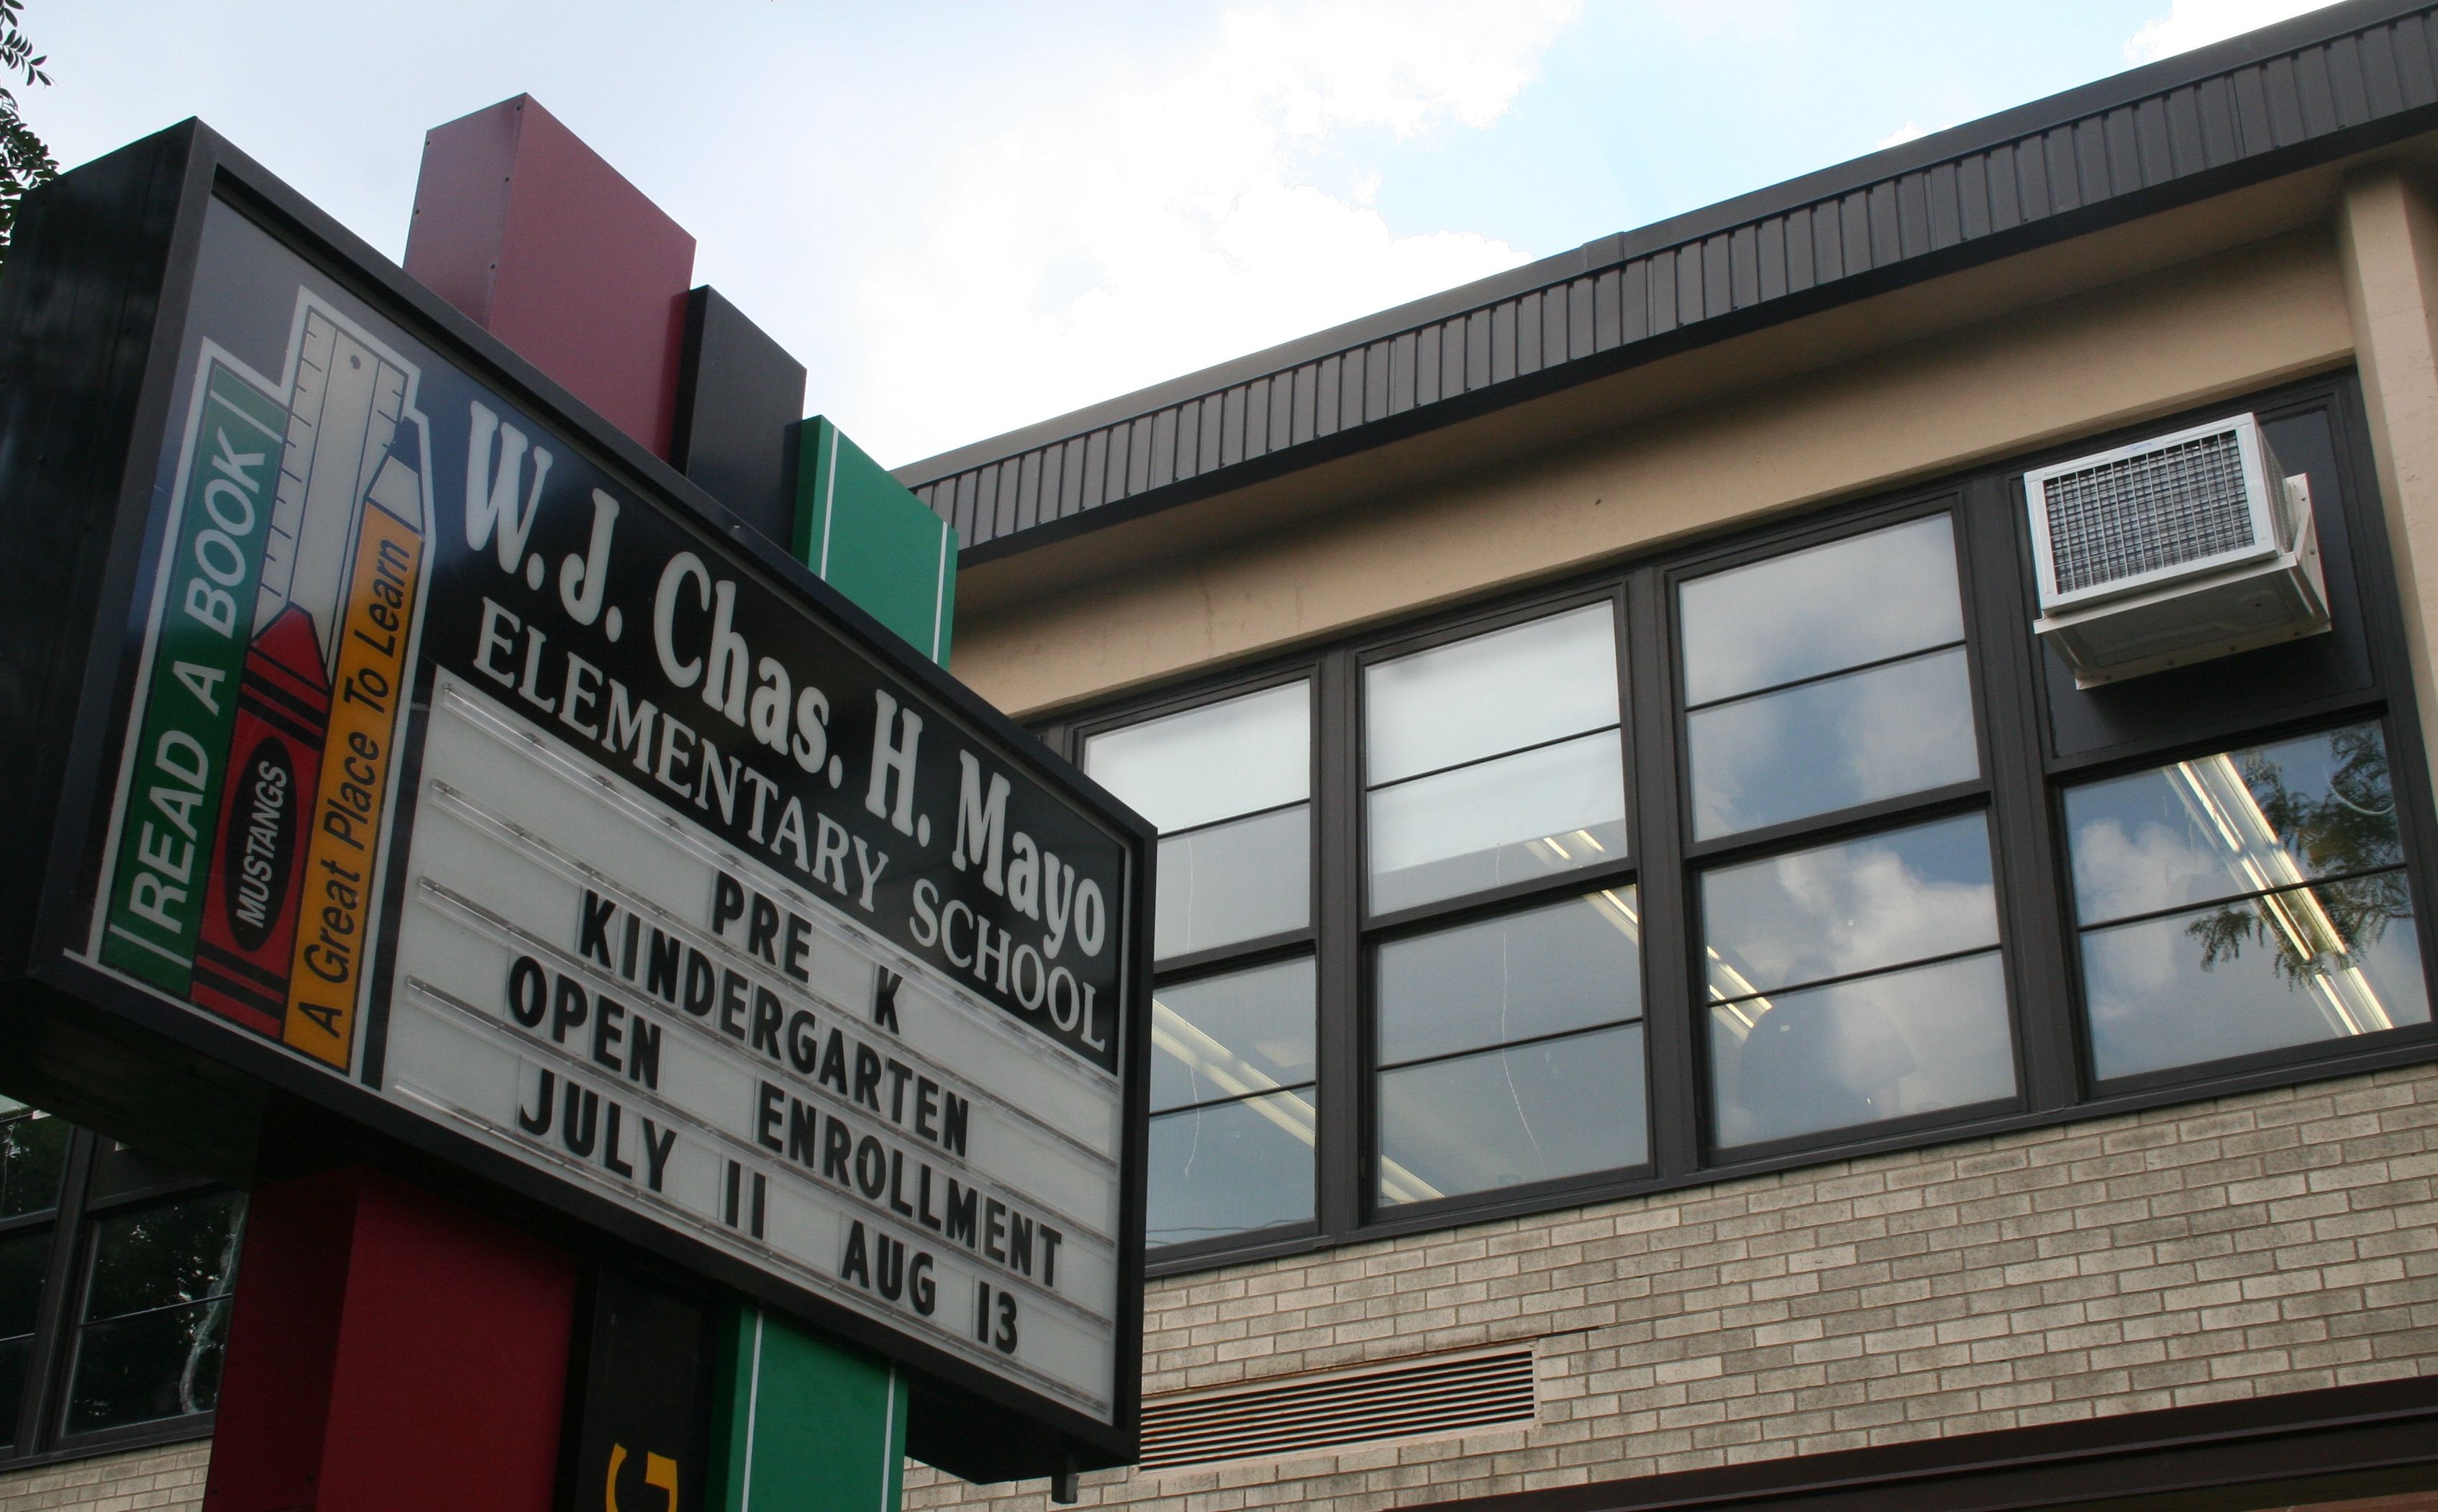 featured image William J & Charles H Mayo Elementary School